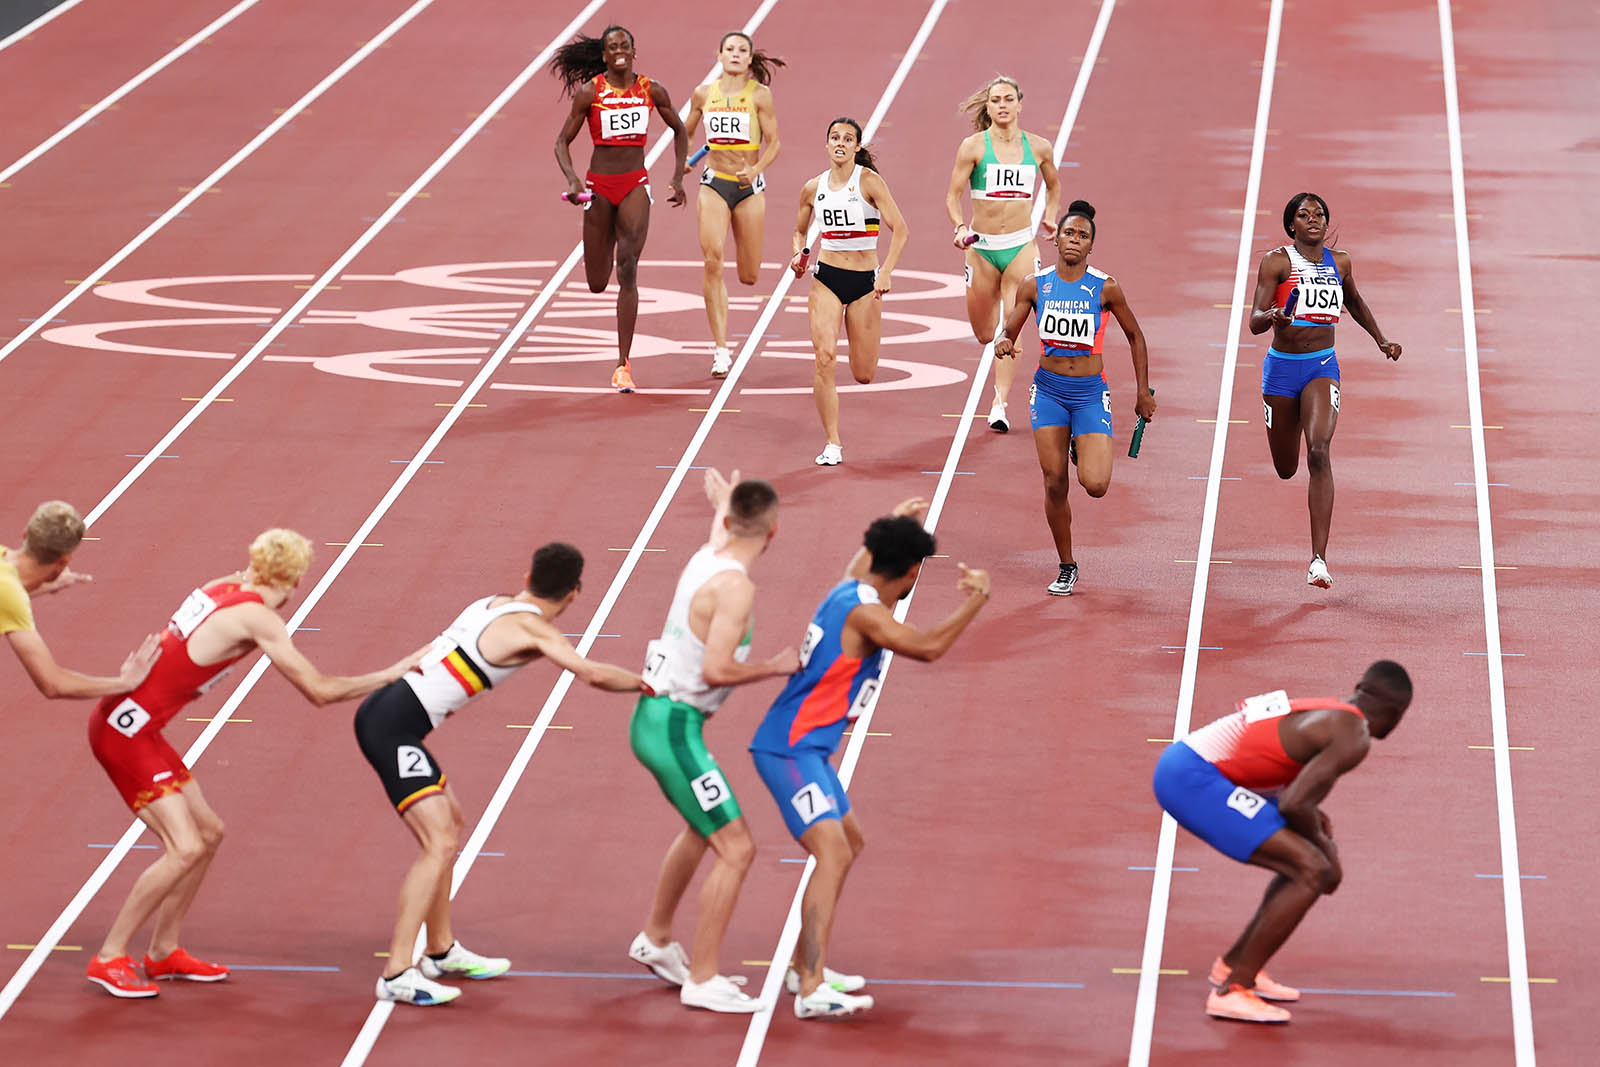 Competitors race to hand off their batons during the first round of the 4x400m mixed team relay on Friday.  